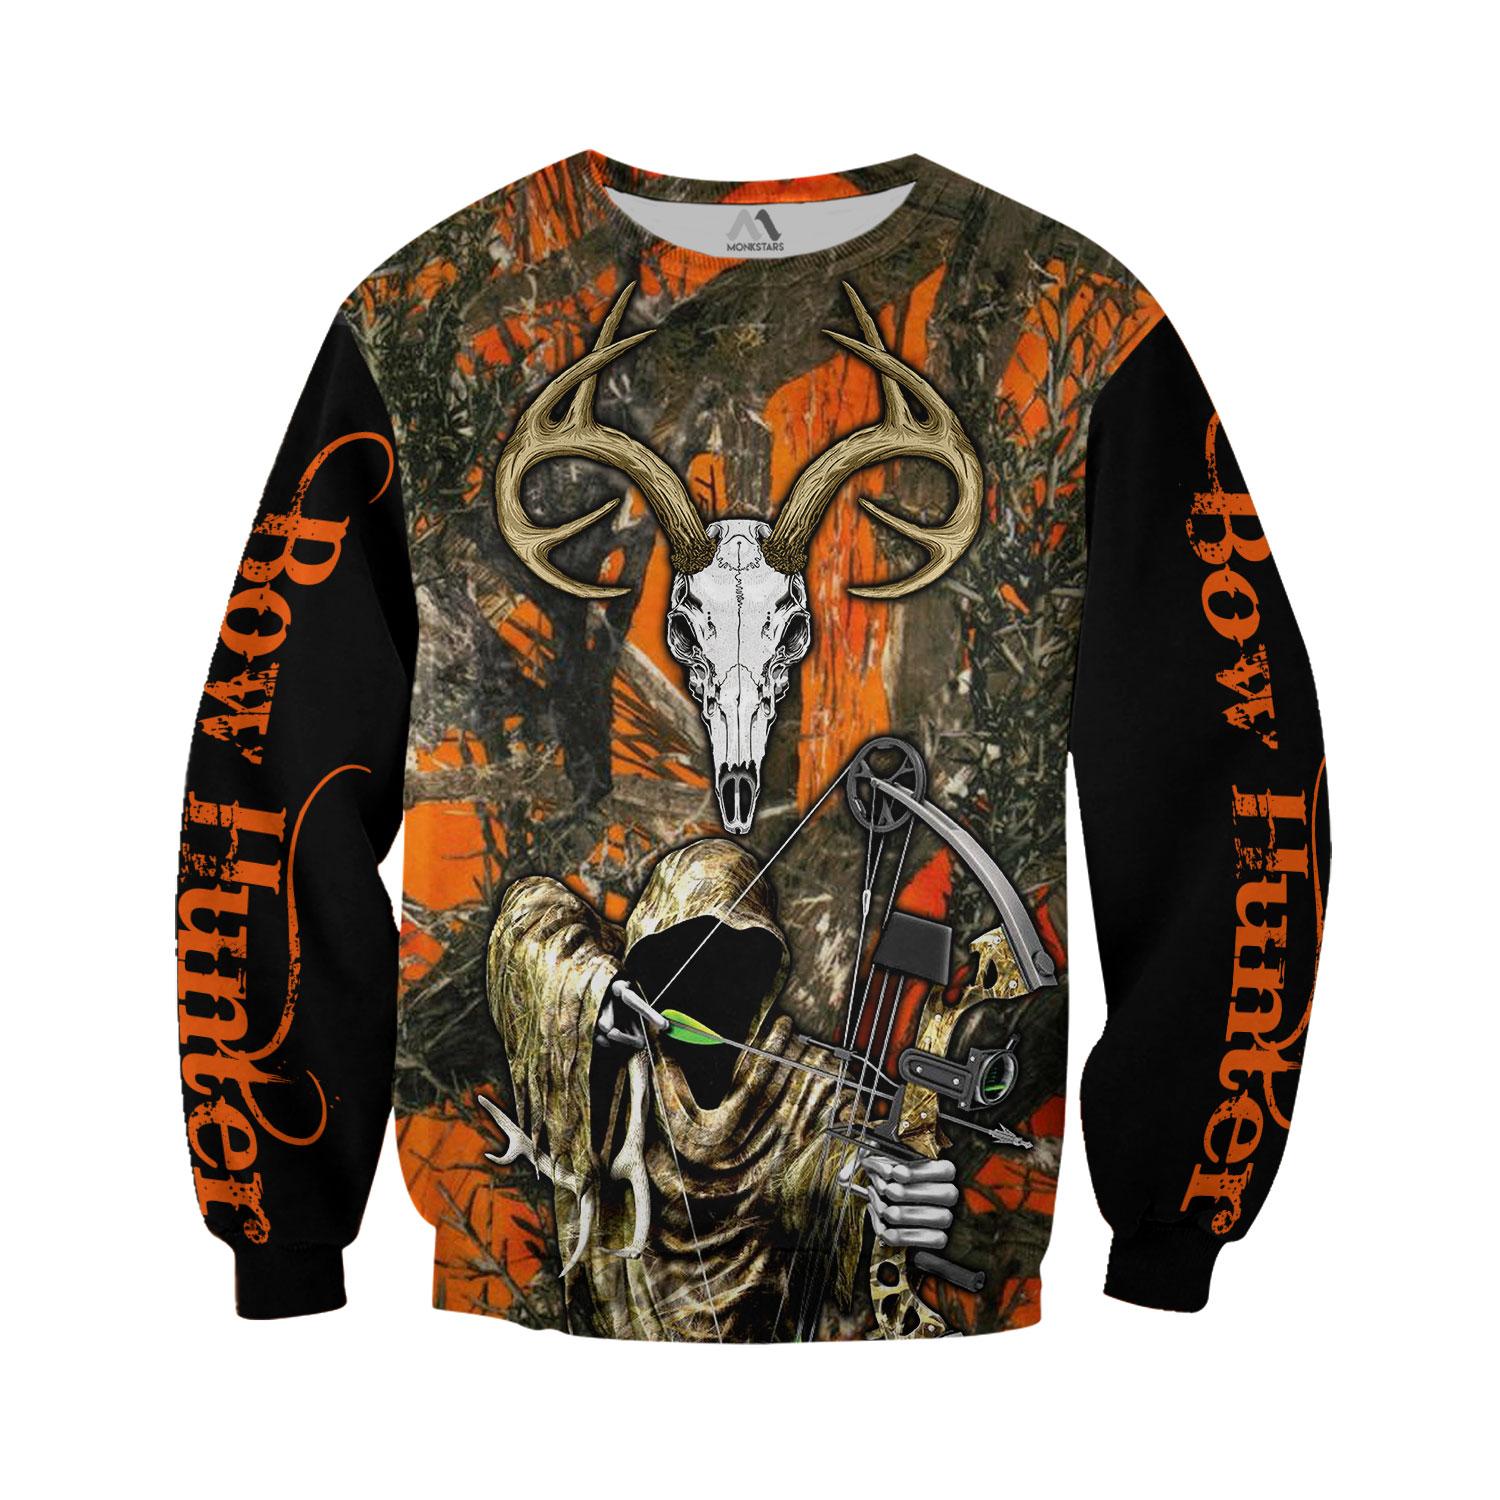 Grim reaper bow hunter camo 3d all over printed sweater